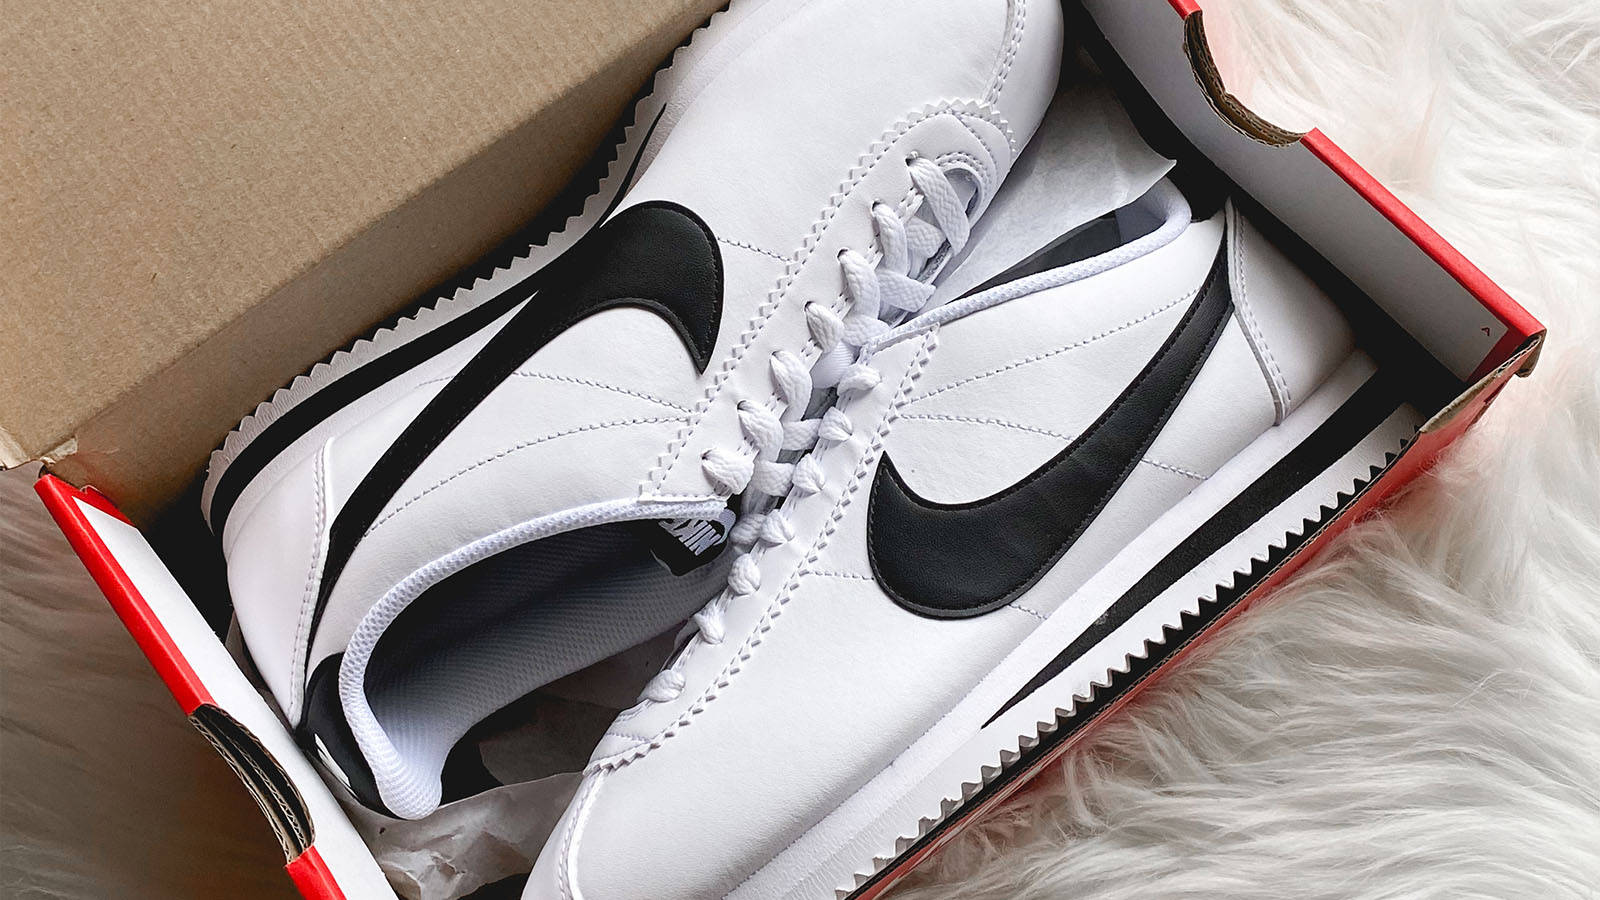 elegante soporte Gimnasia Nike Cortez Sizing: How Do They Fit? | The Sole Supplier